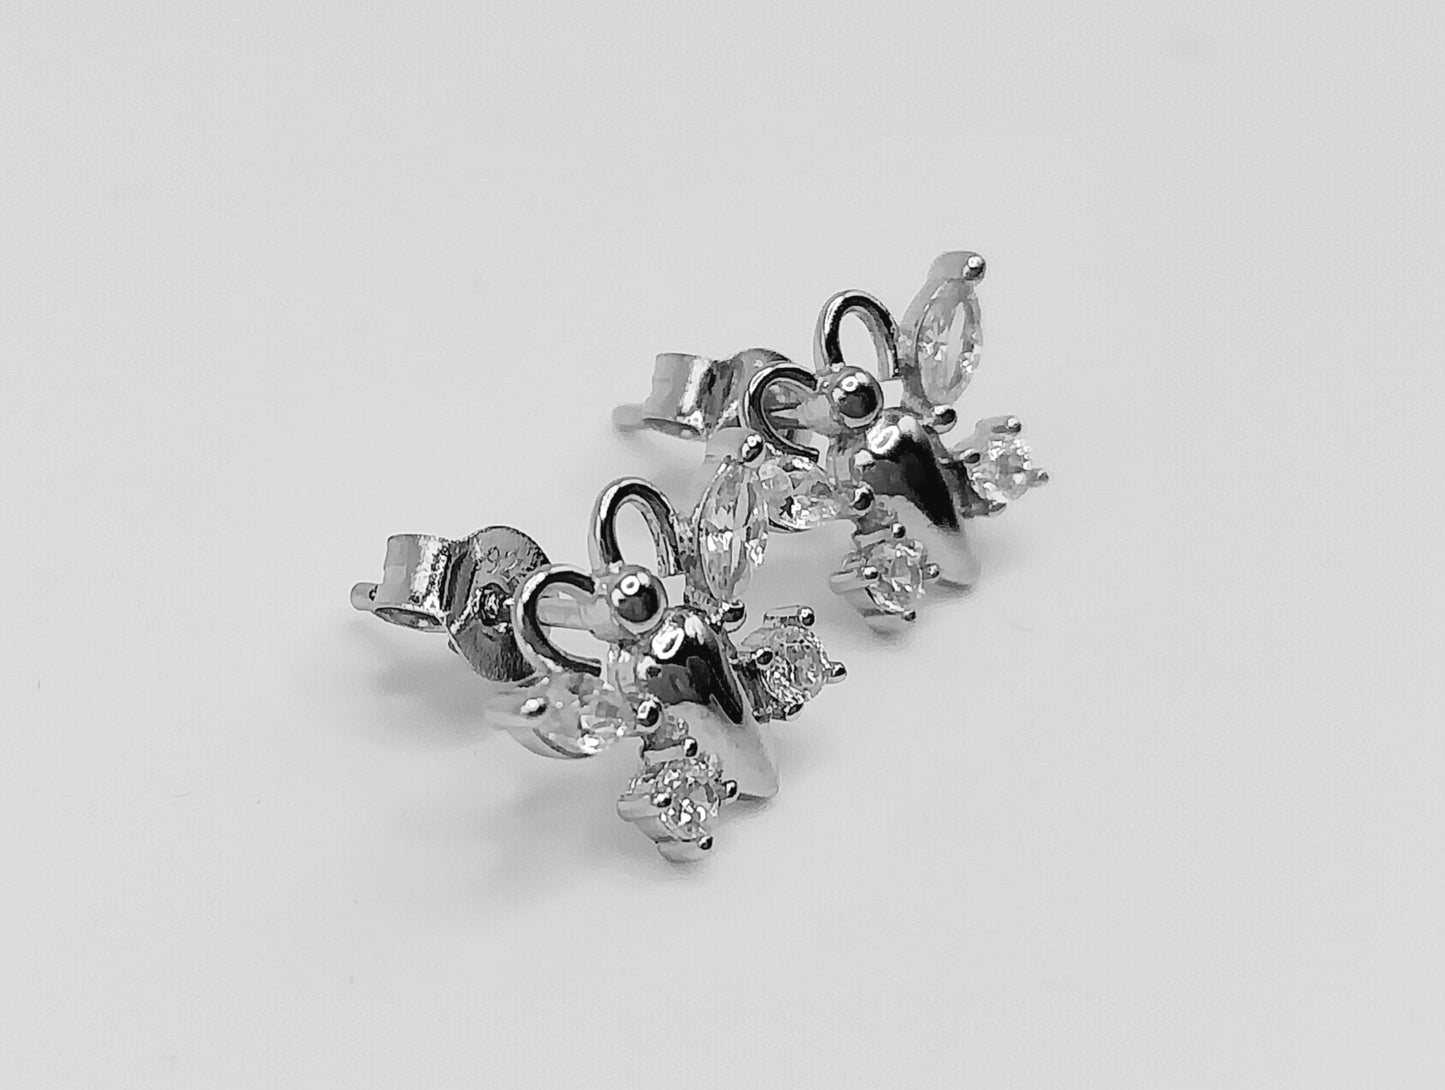 Butterfly Stud Earrings with Cubic Zirconia Stones